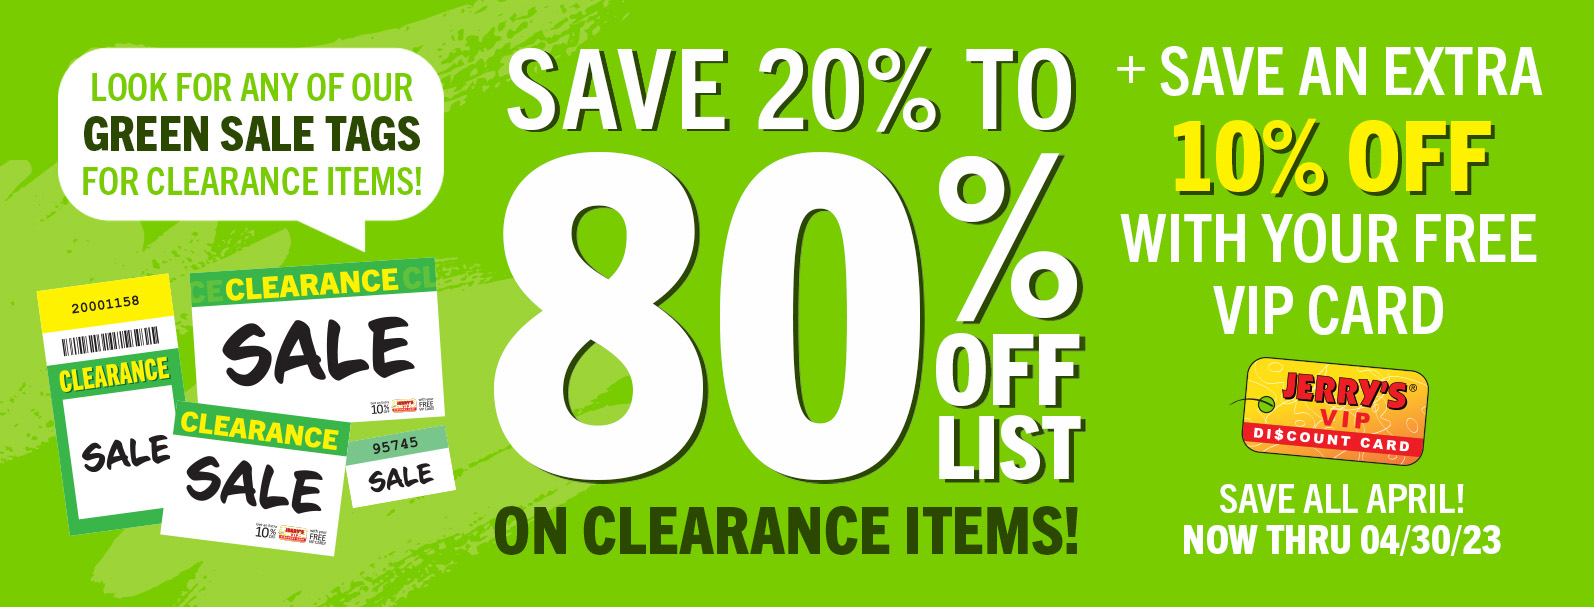 Overstock and Clearance Art Supplies